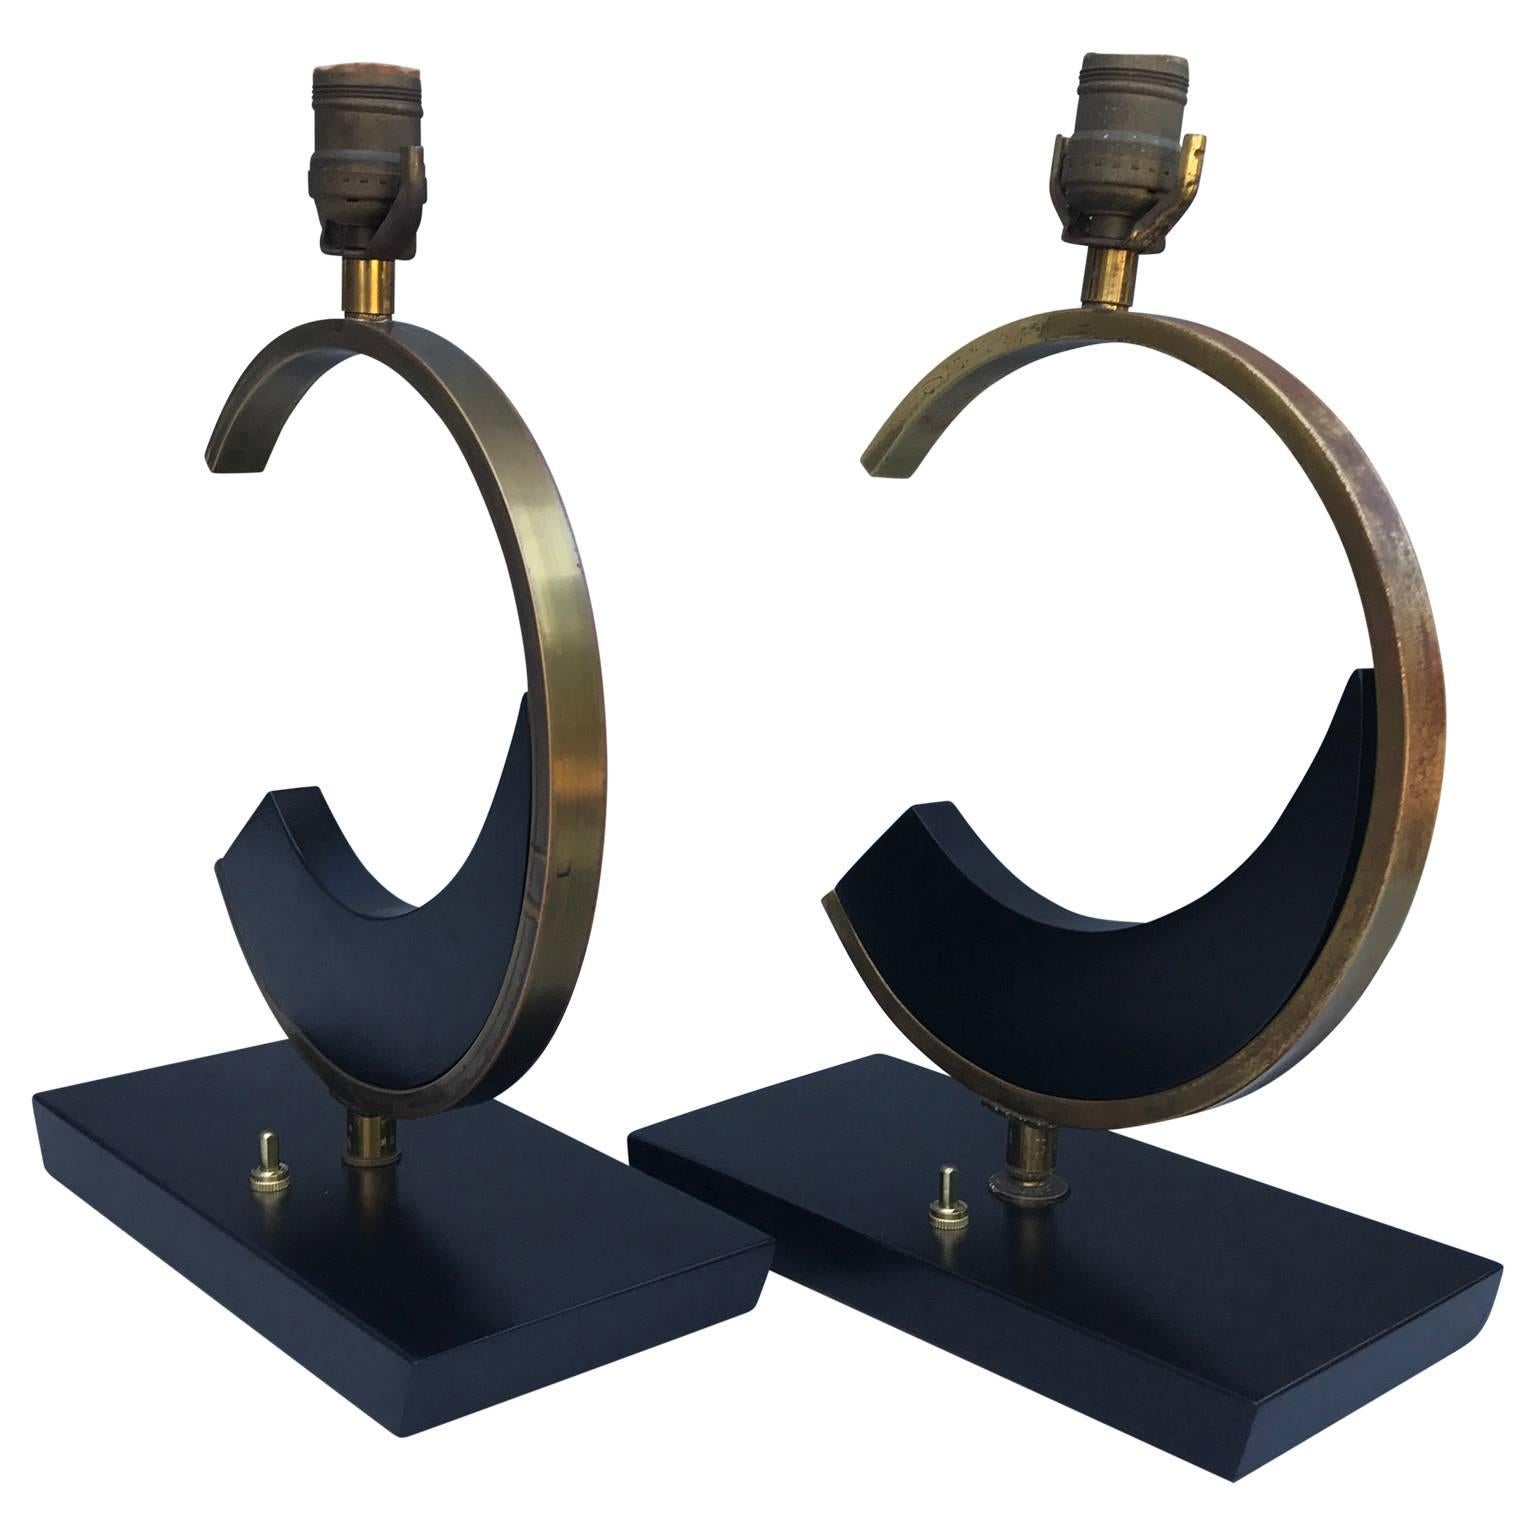 A small pair of bedside table lamps, in the shape of a large C. They have the scent of chanel-look-alike.
The lamps are made of black-paiinted wood and brass with great patina.
Newly re-wired and new brass switch to UL standard.